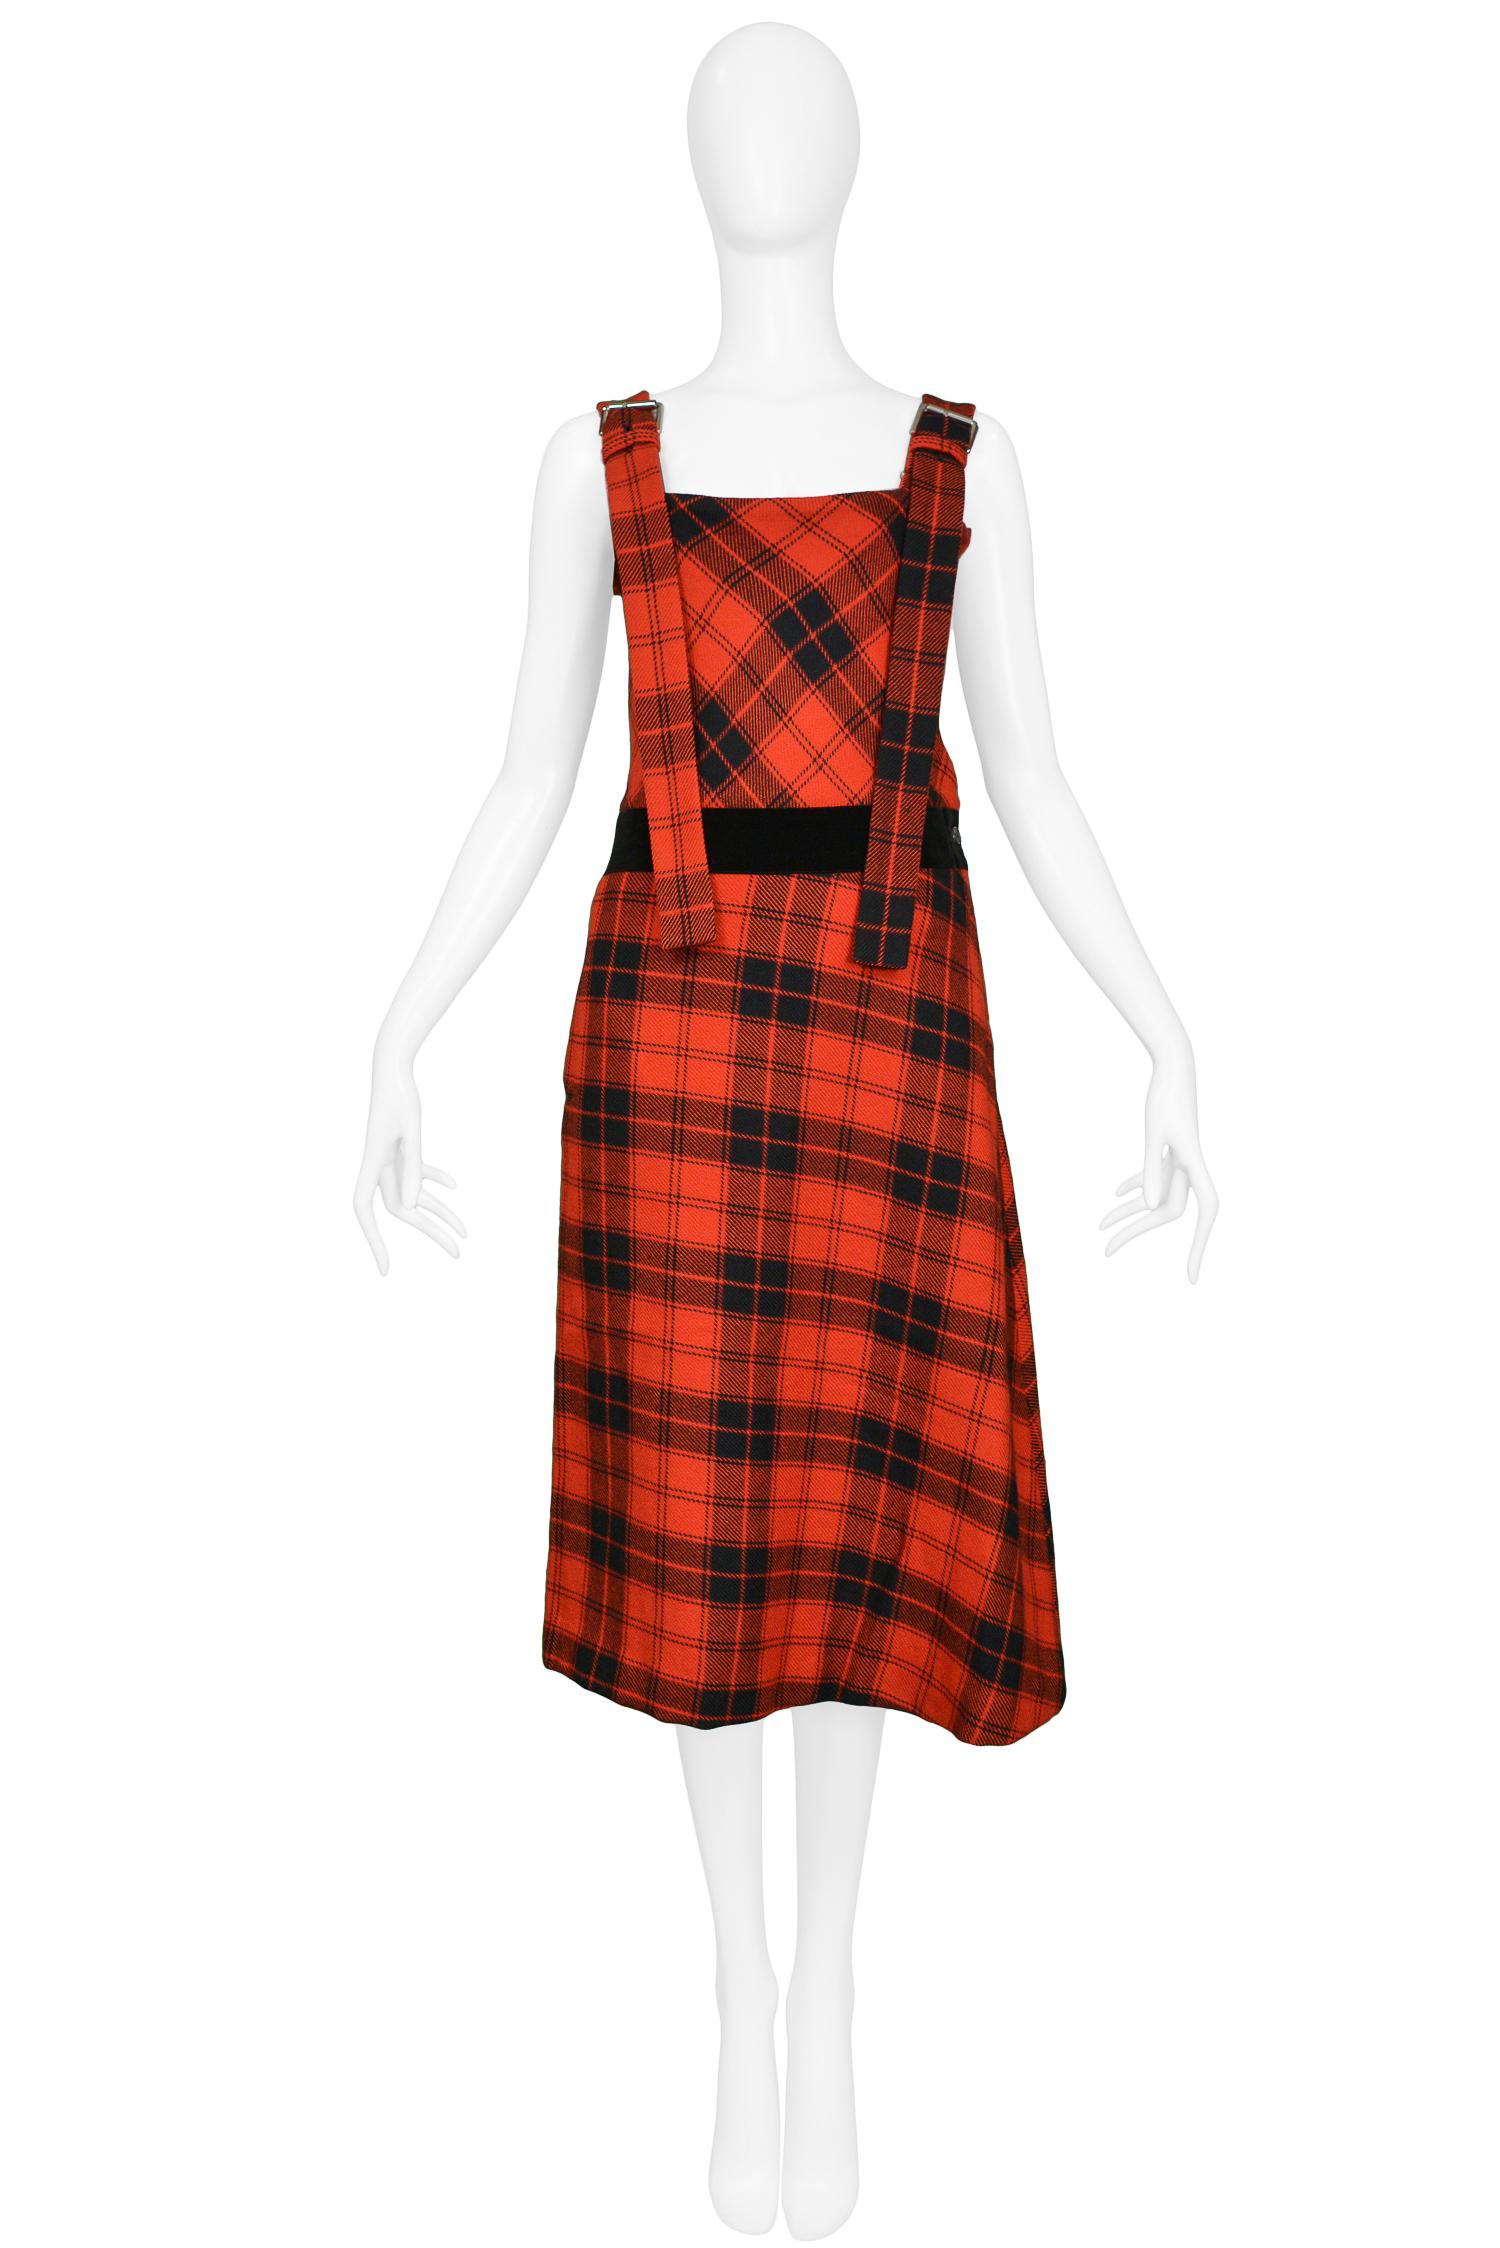 Vintage Yohji Yamamoto red and black wool plaid knee-length jumper dress with adjustable straps. Collection 2003.

Excellent Vintage Condition.

Size Small